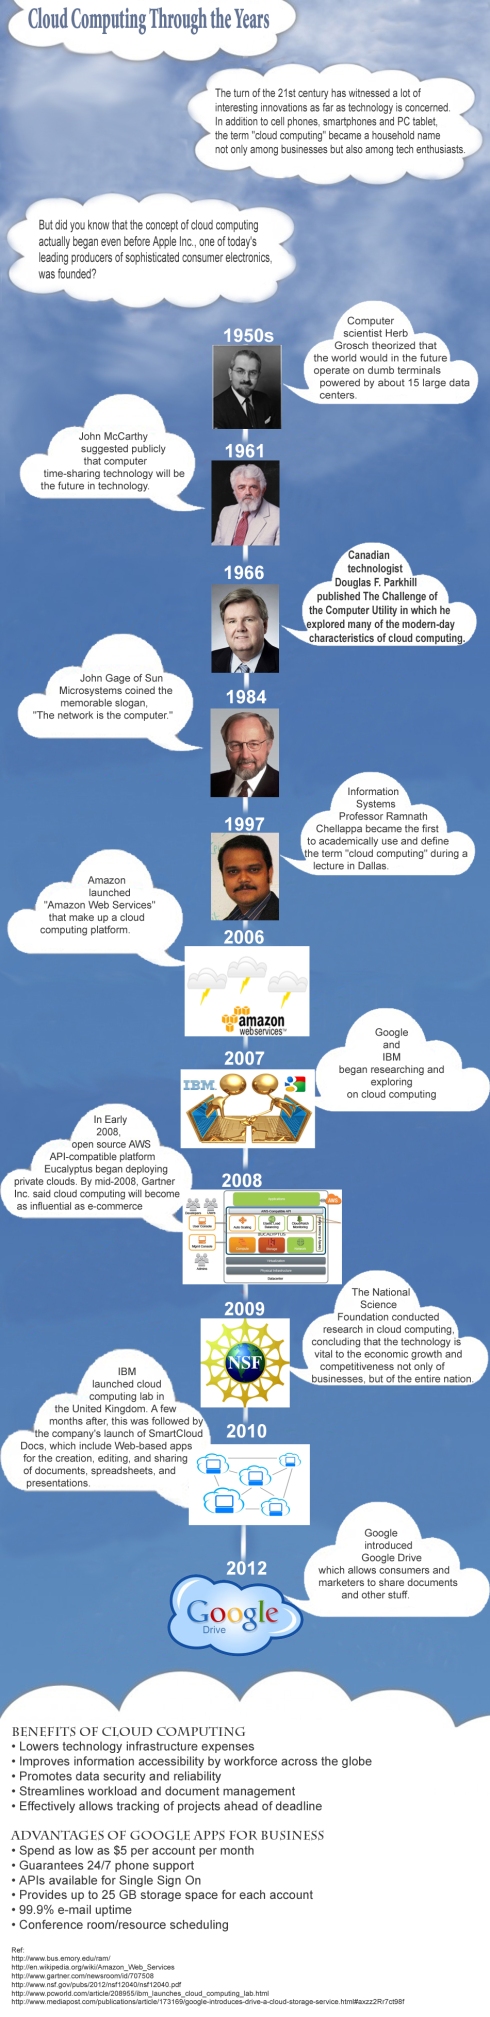 The concept of cloud computing goes back at least 50 years.